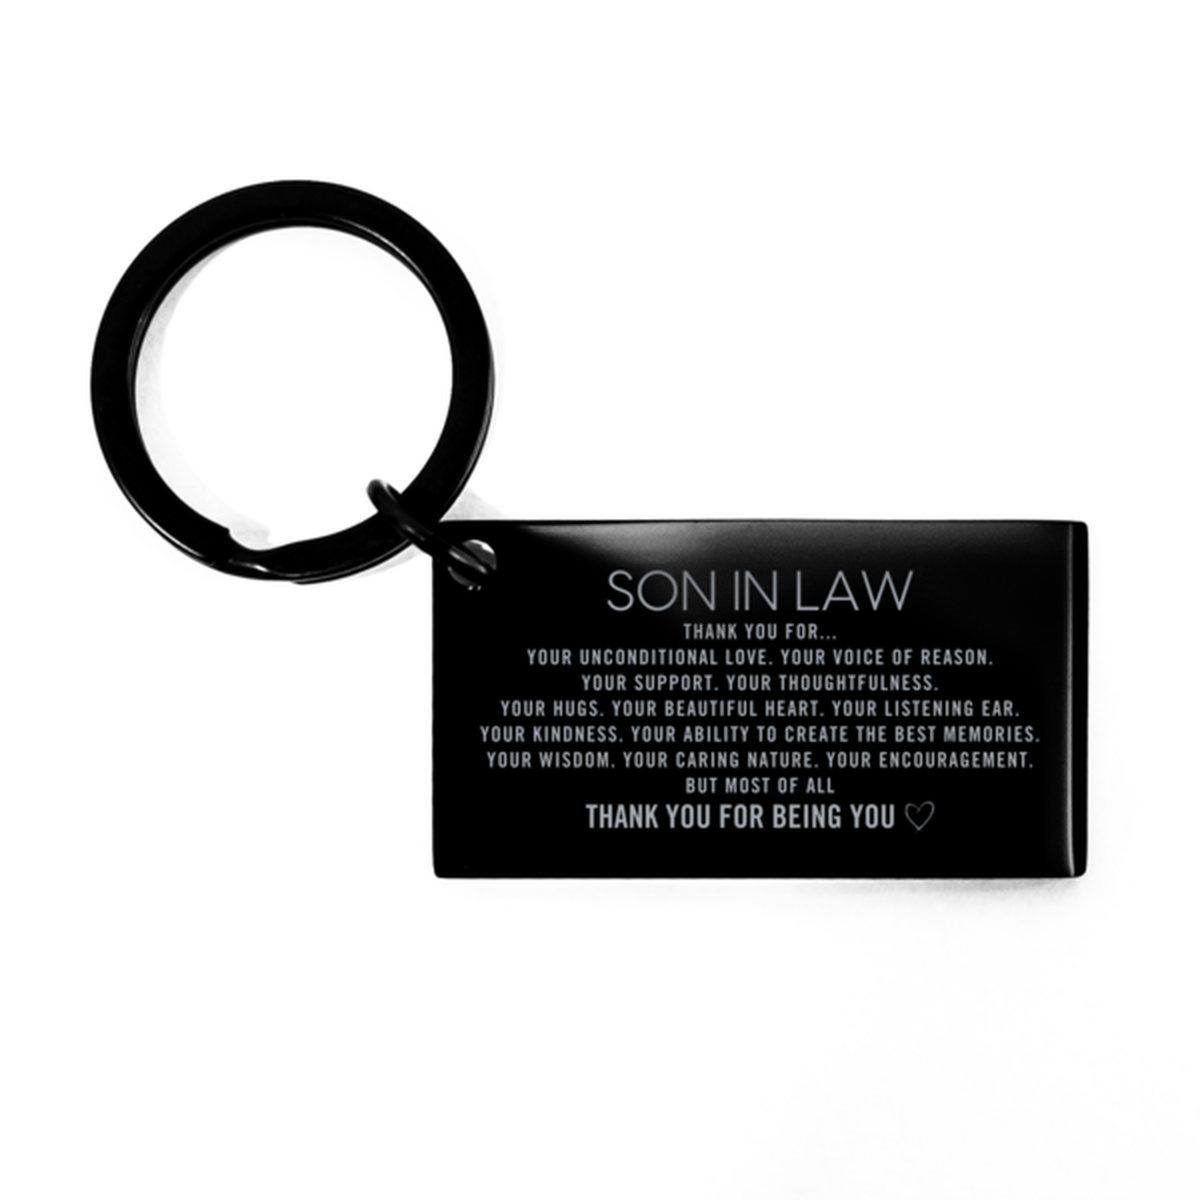 Son In Law Keychain Custom, Engraved Gifts For Son In Law Christmas Graduation Birthday Gifts for Men Women Son In Law Thank you for Your unconditional love